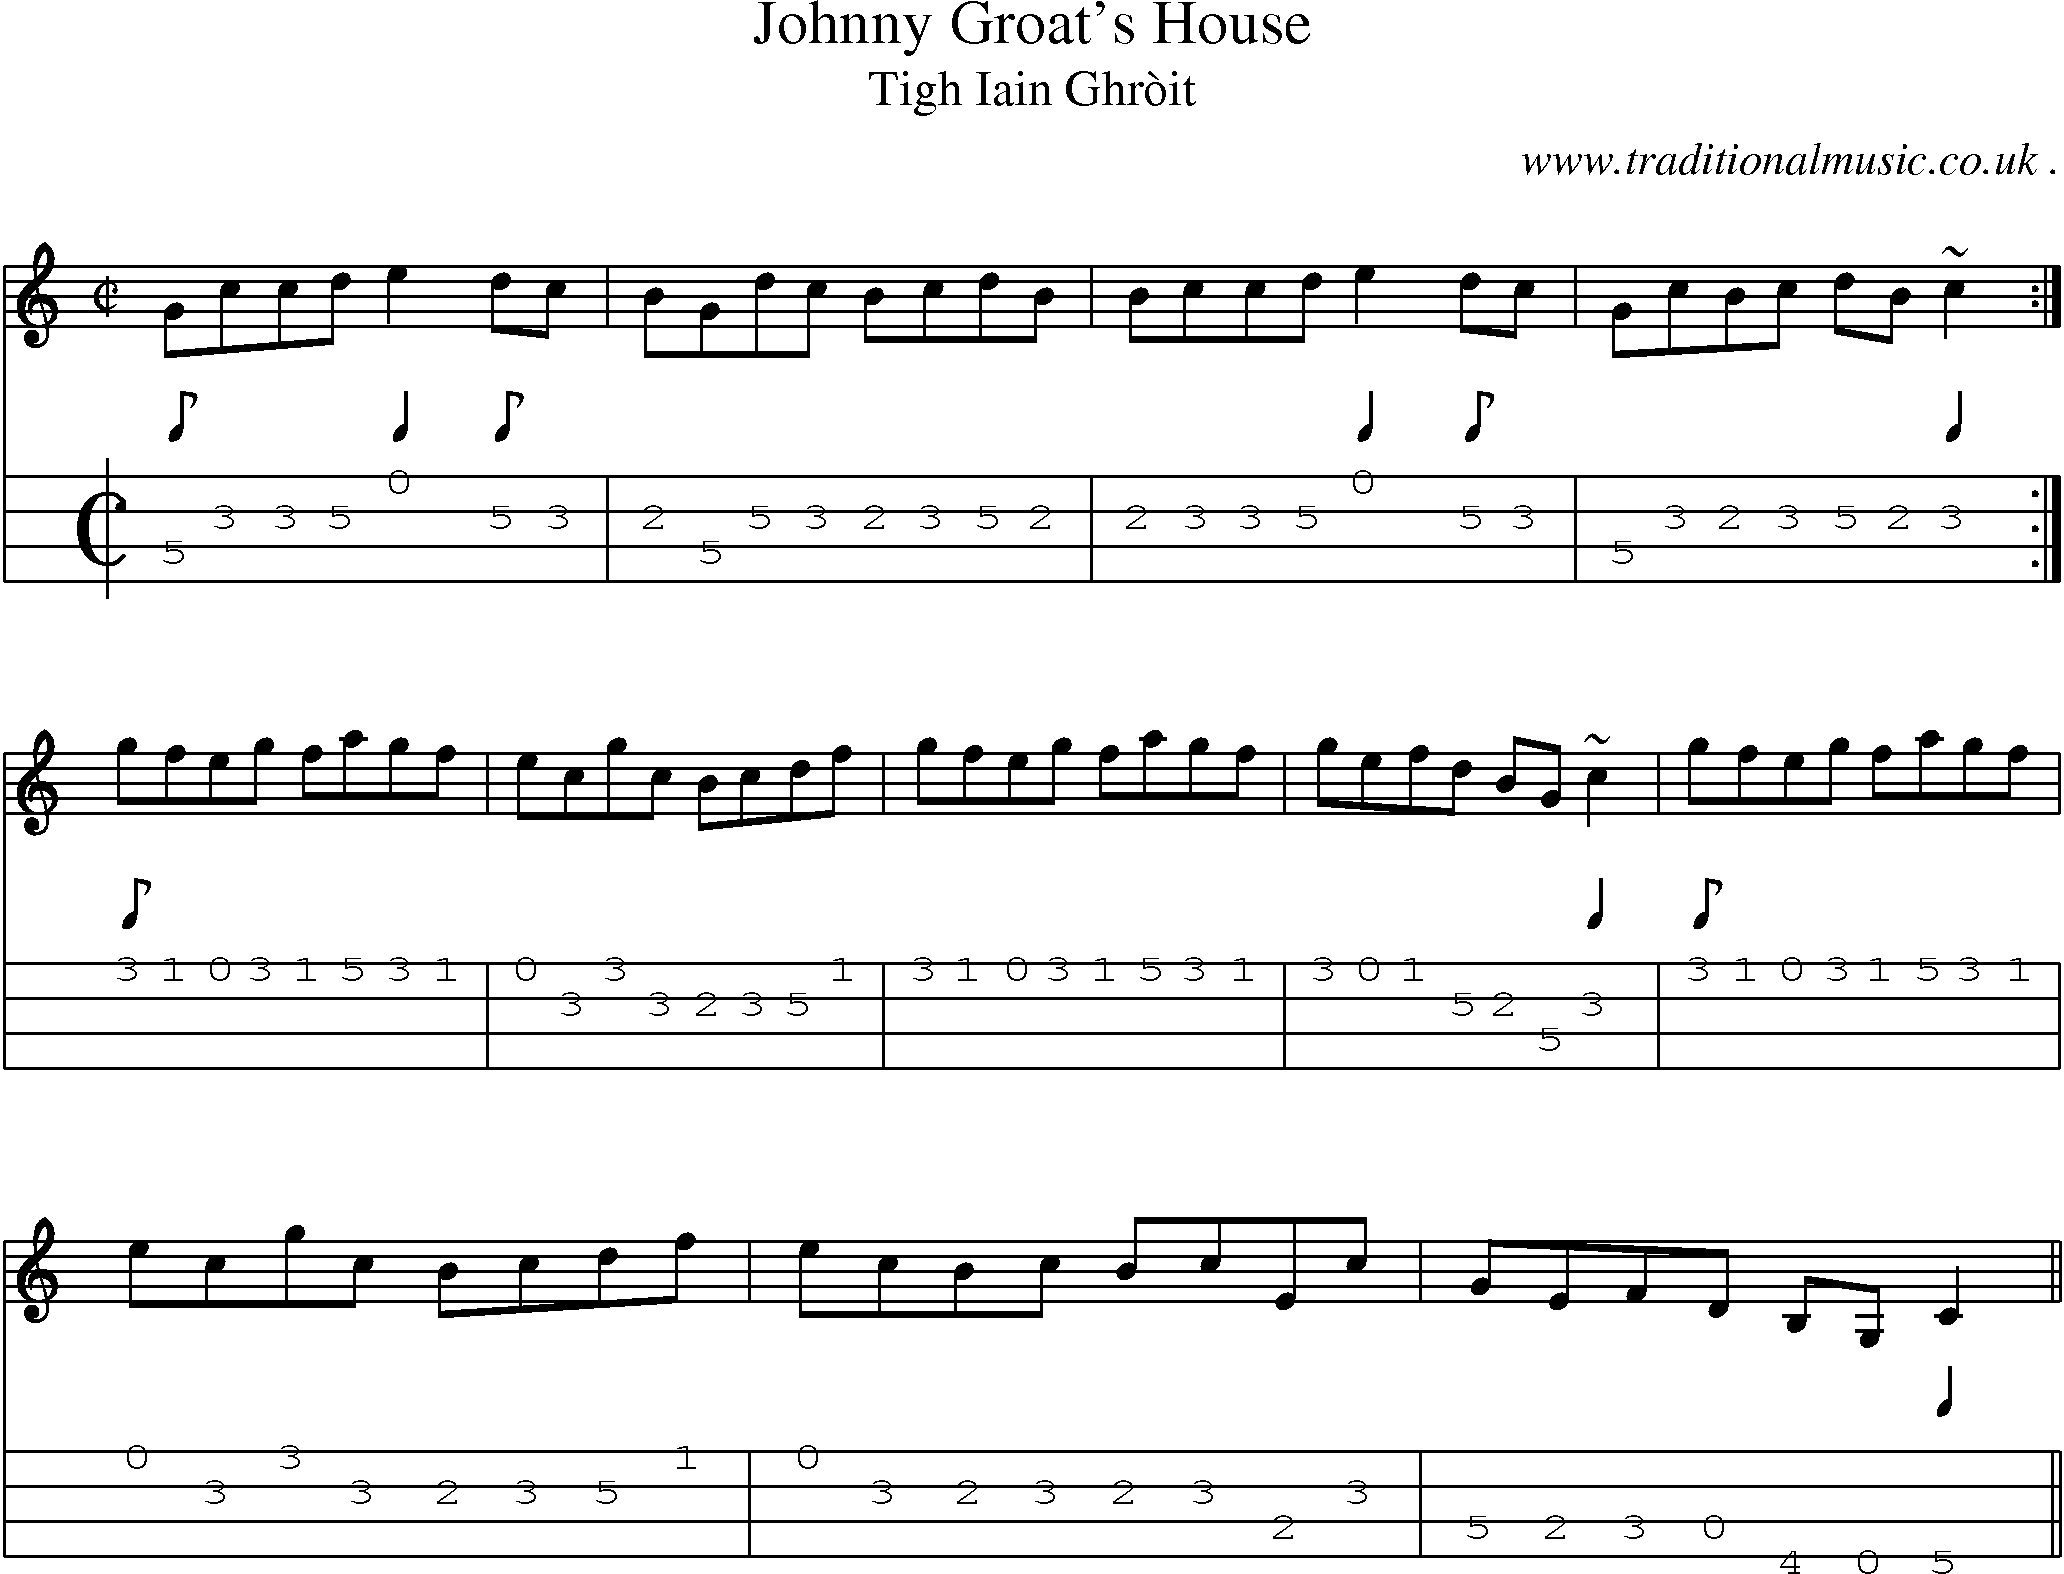 Sheet-music  score, Chords and Mandolin Tabs for Johnny Groats House